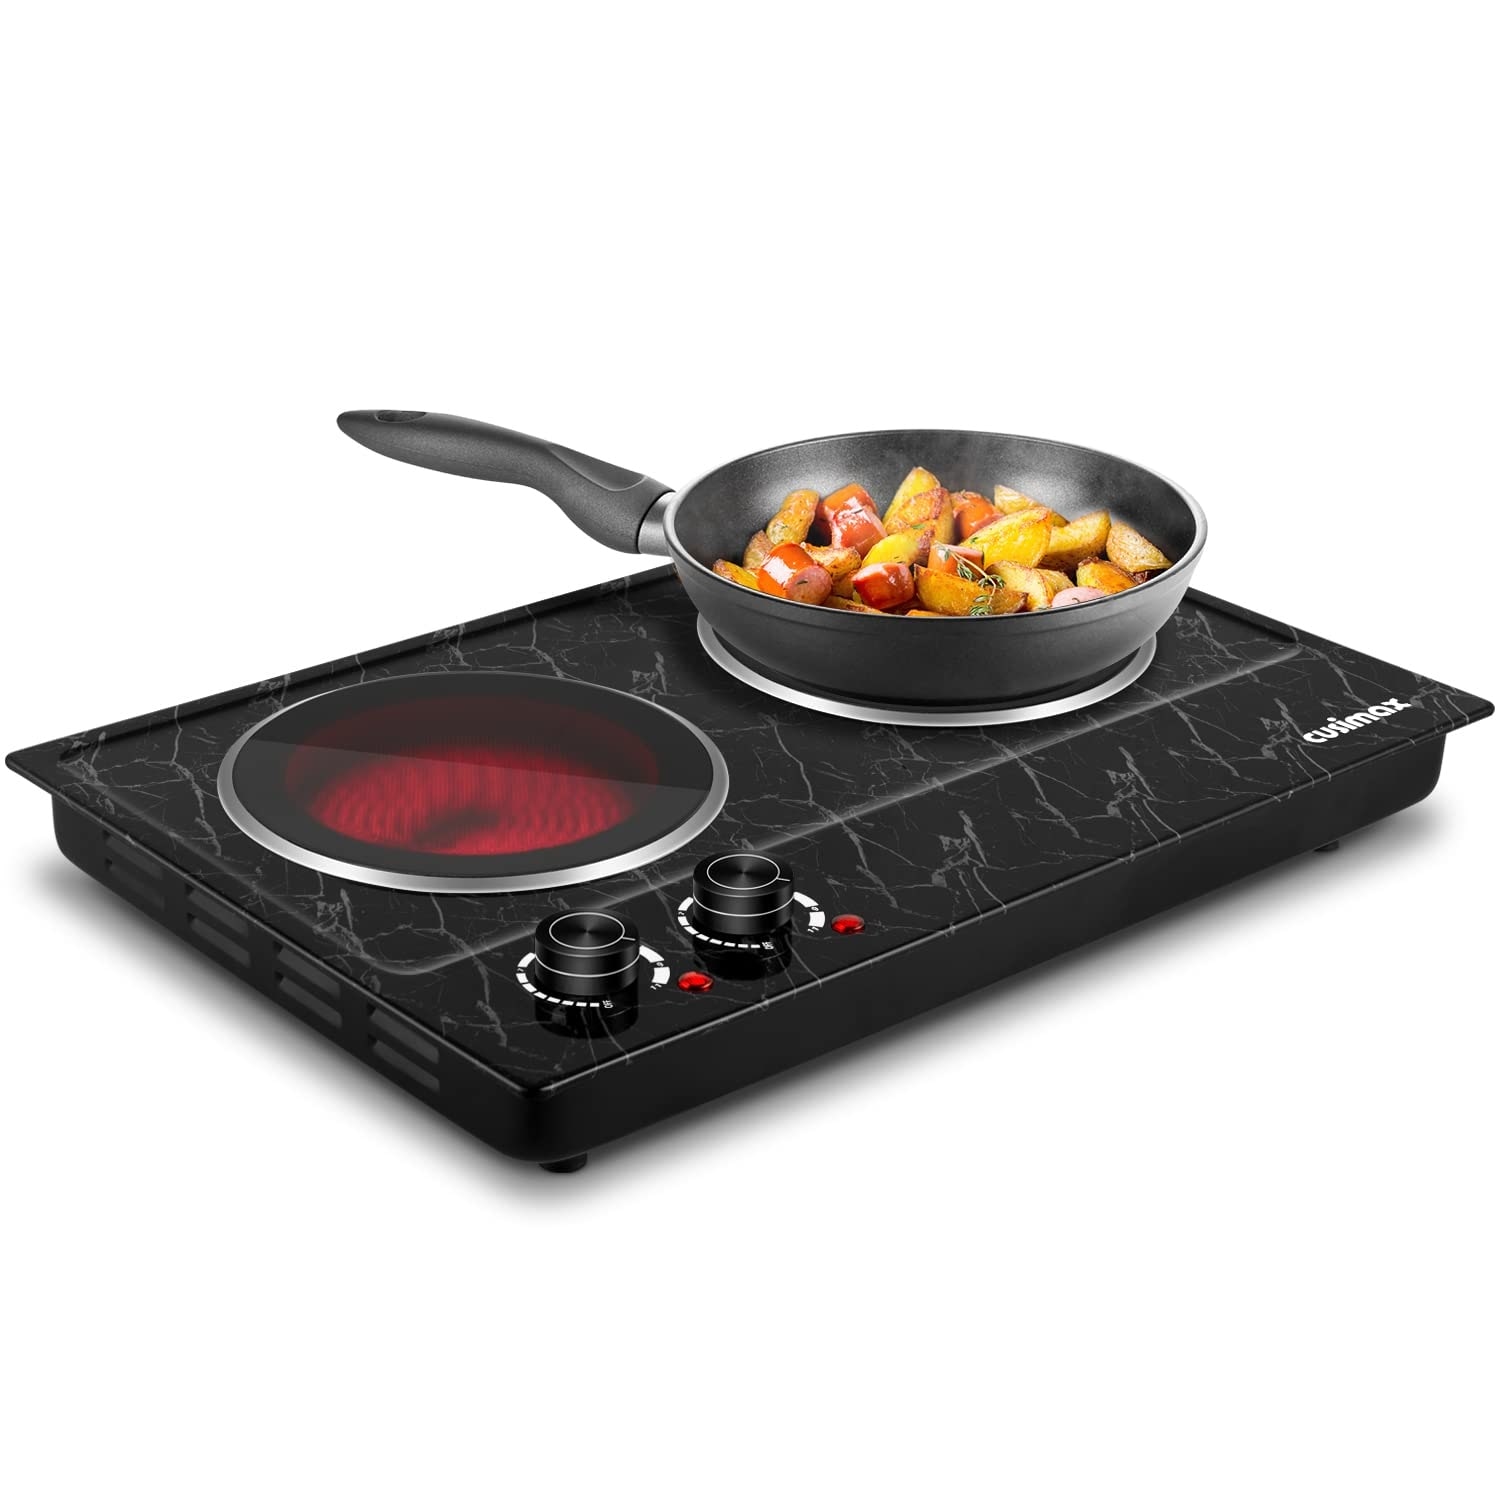 Elexnux 1800W Ceramic Electric Hot Plate for Cooking Portable Dual Control  Infrared Cooktop, Glass Plate Countertop Burner - On Sale - Bed Bath &  Beyond - 38103017